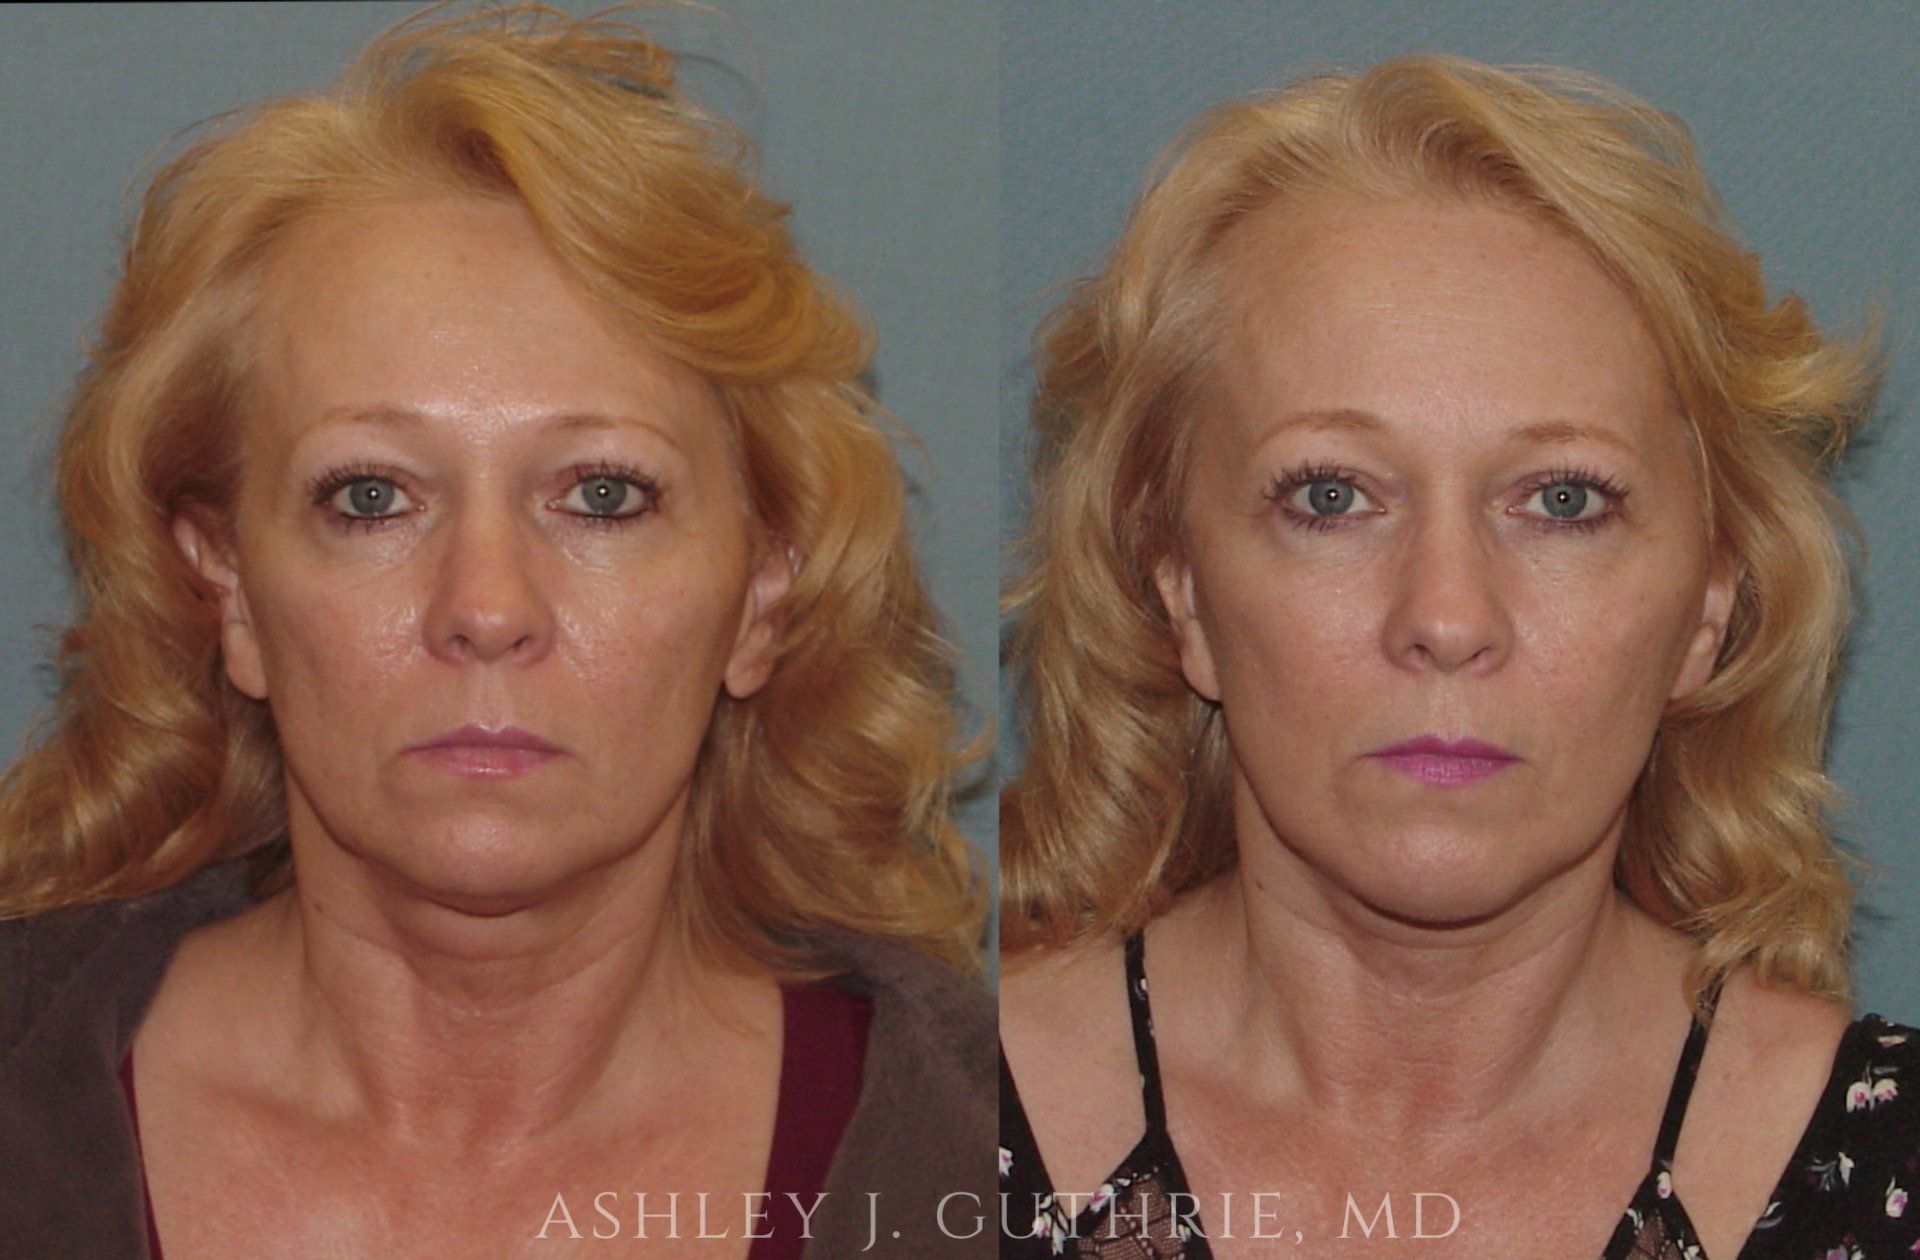 Guthrie Plastic Surgery patient before and after facelift